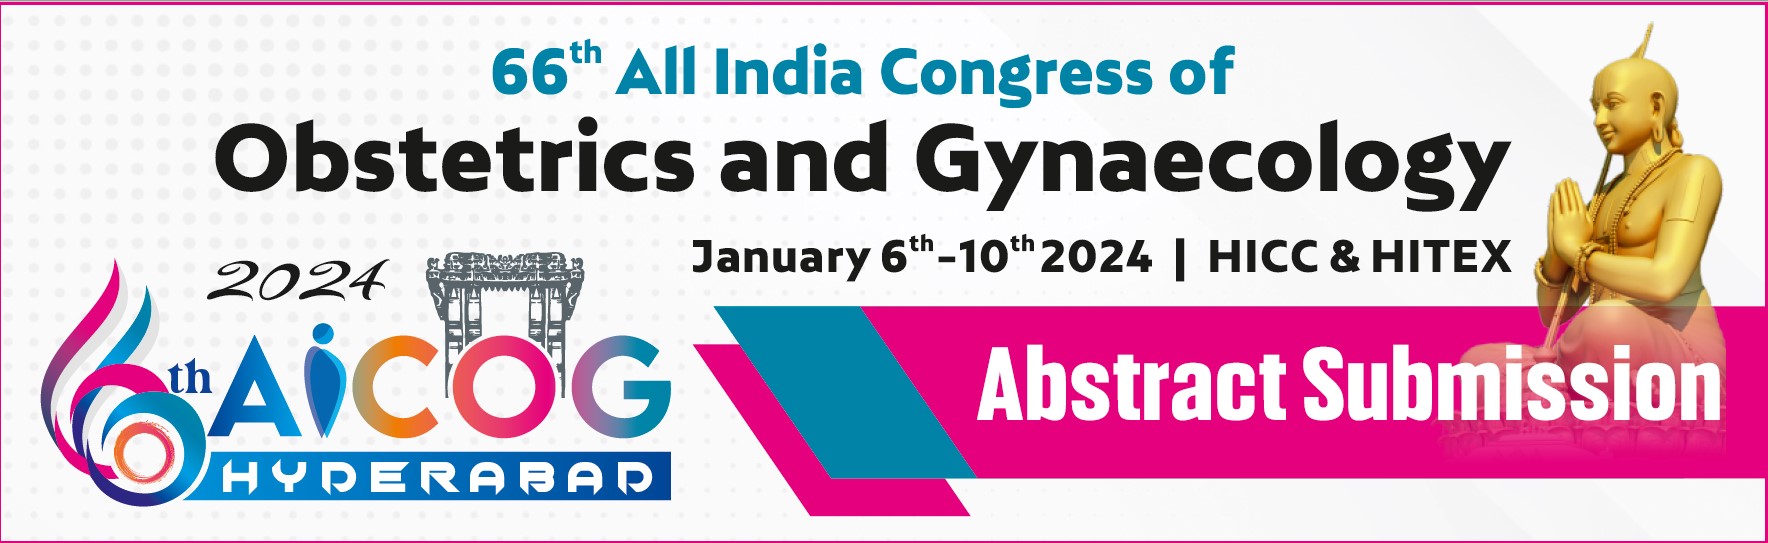 AICOG 2024 Abstract Submission